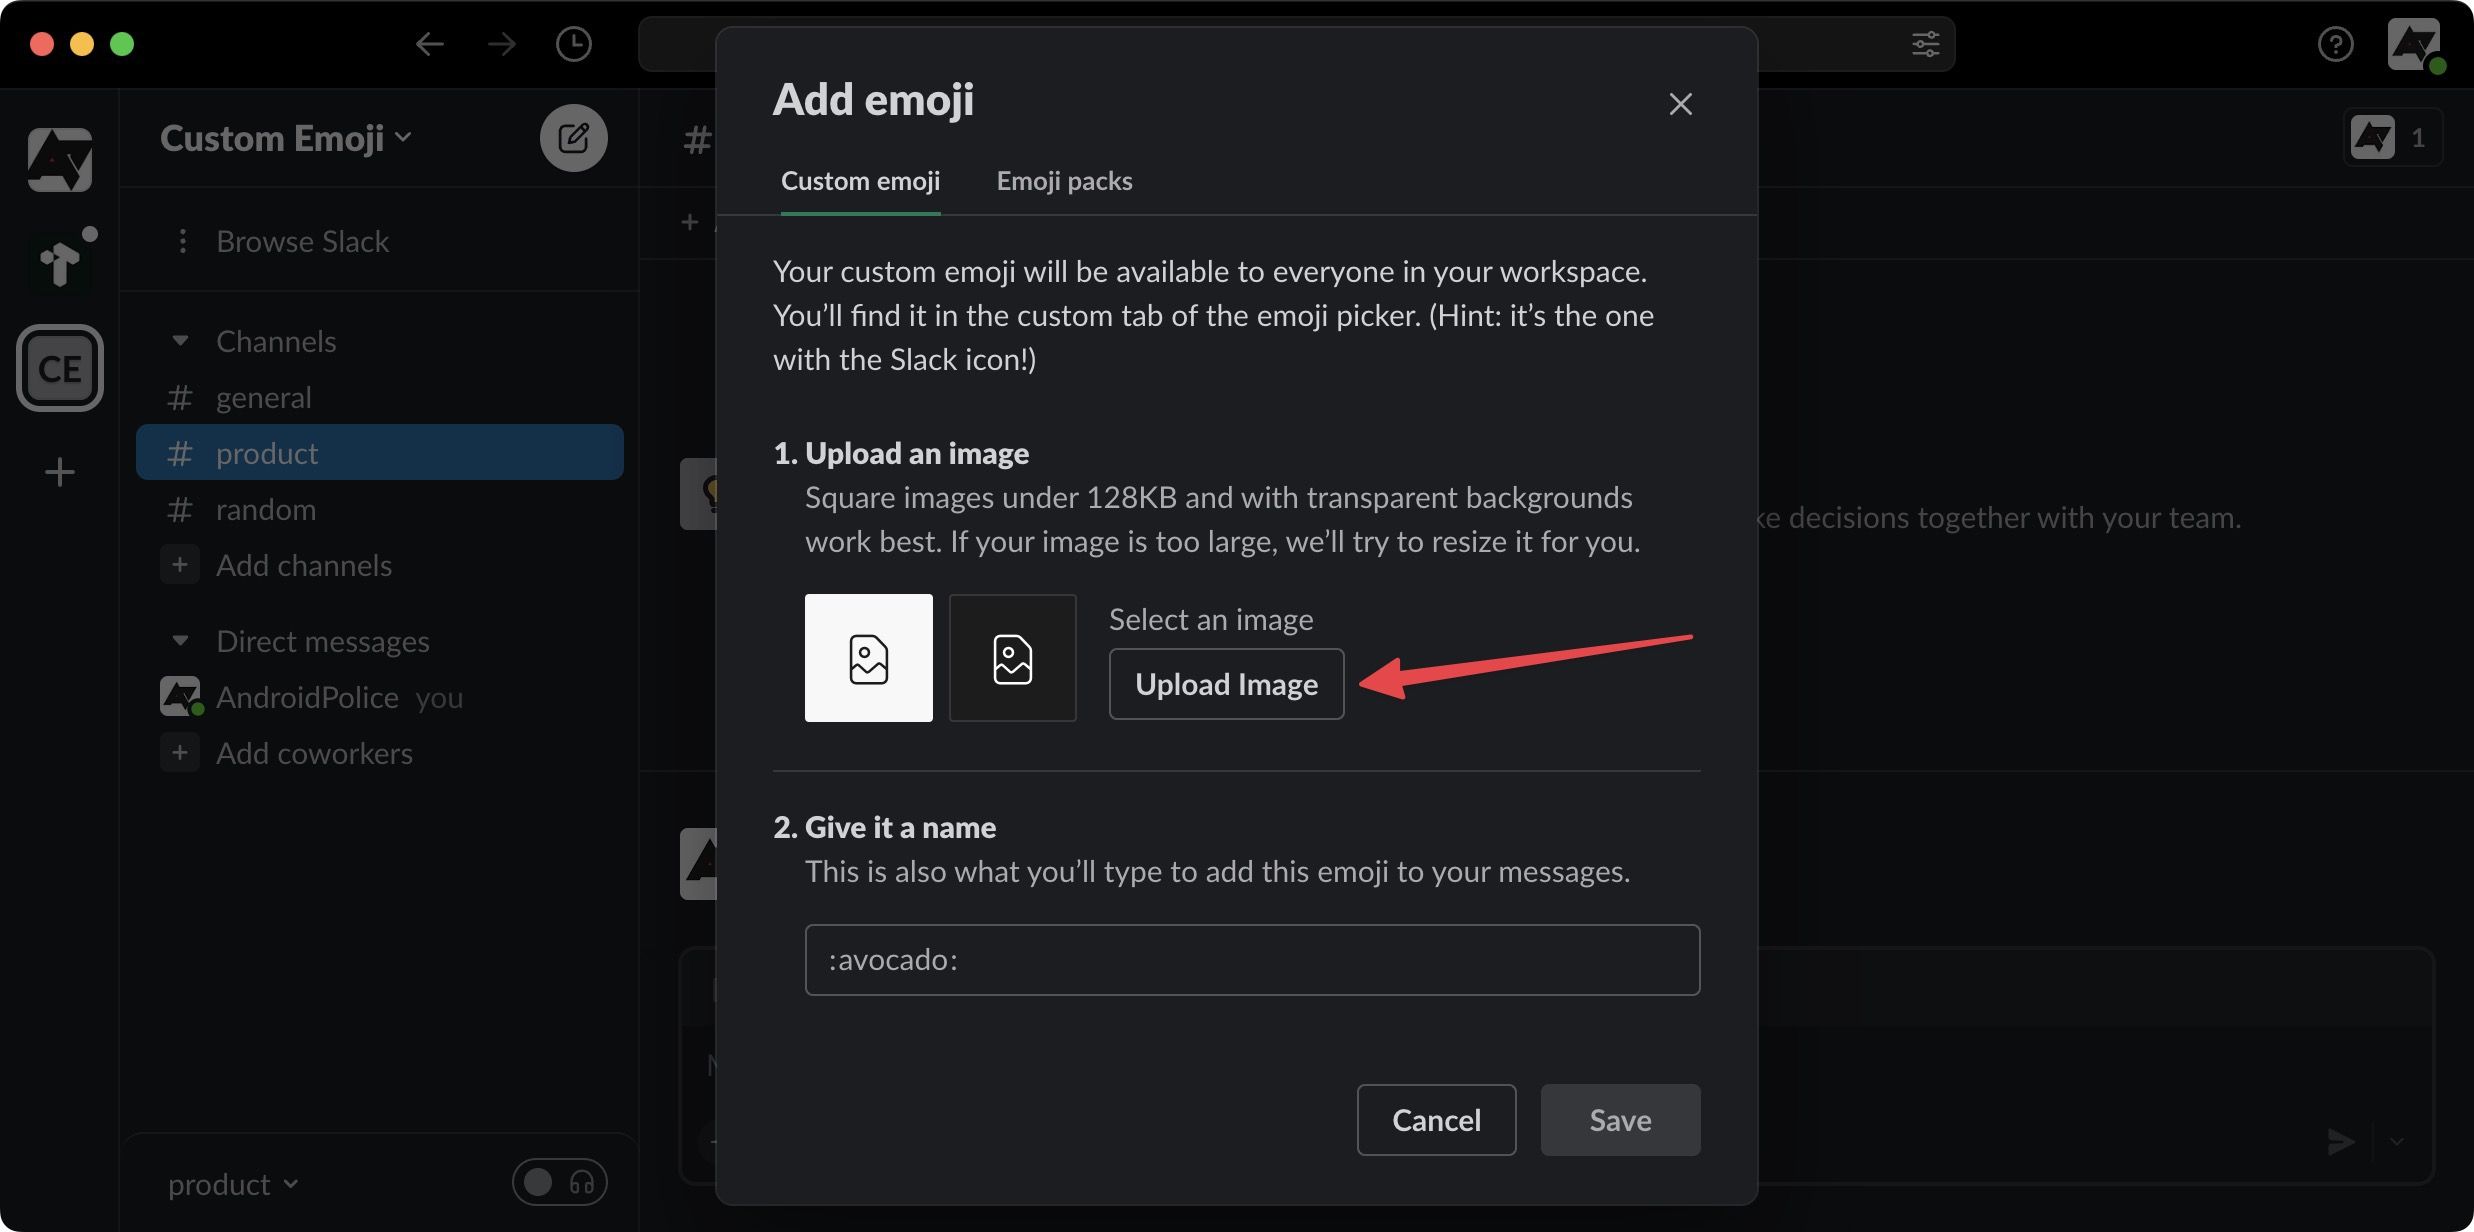 A pop-up window designed for adding an emoji, featuring detailed information on creating custom emojis. Inside the window, there is an arrow pointing towards the 'upload image' button. Below this button, there's a text box provided for naming the new custom emoji.